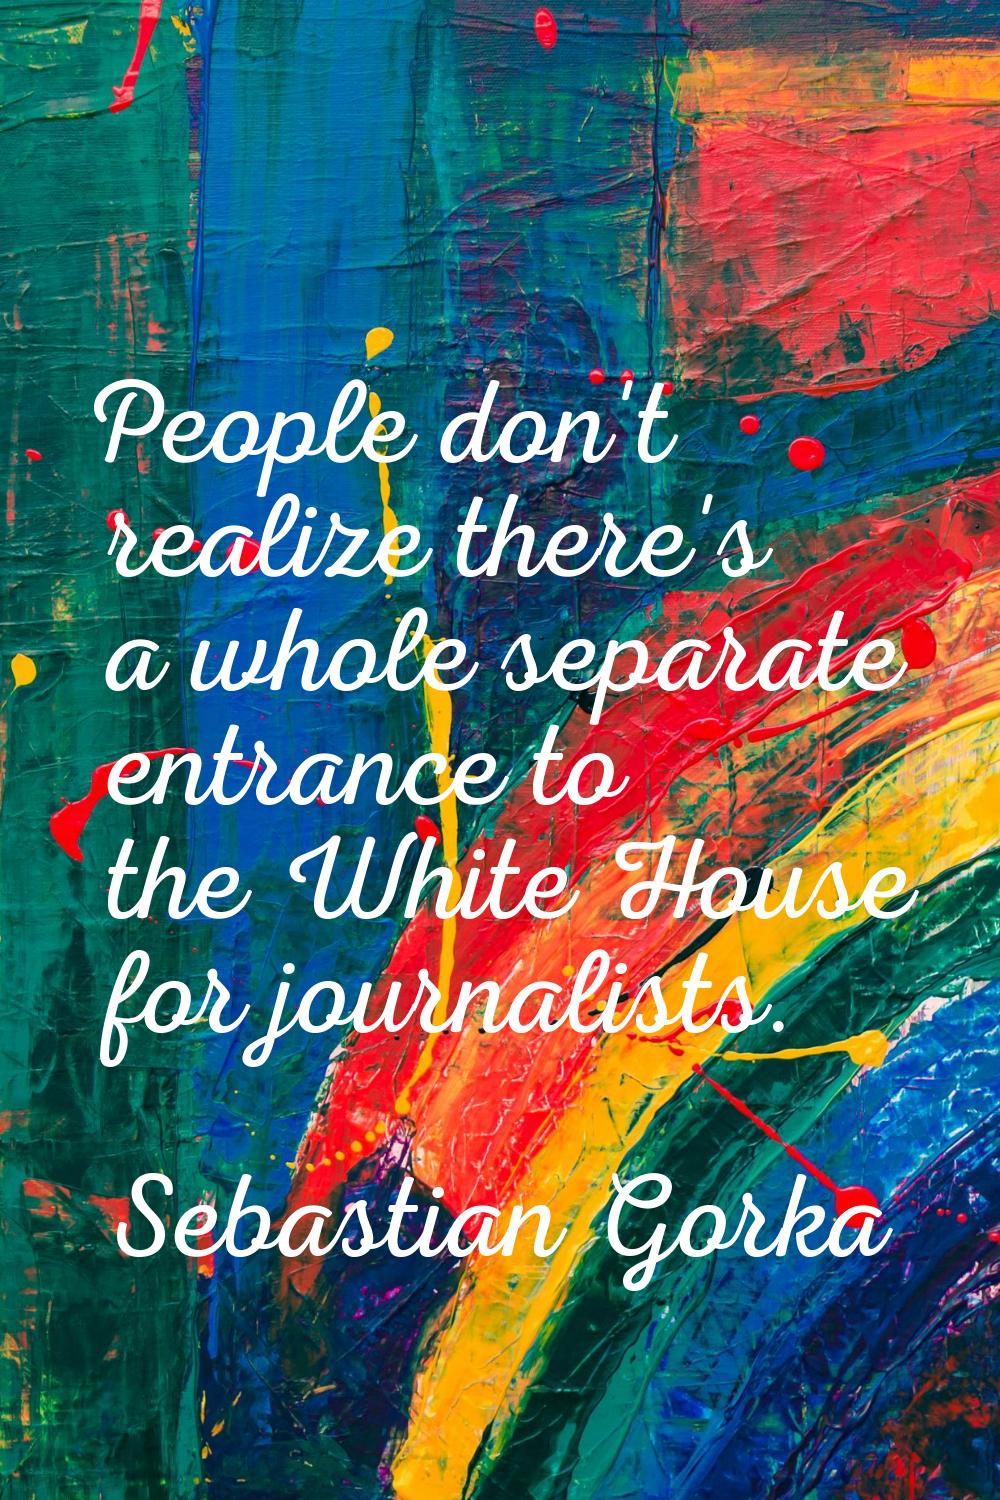 People don't realize there's a whole separate entrance to the White House for journalists.